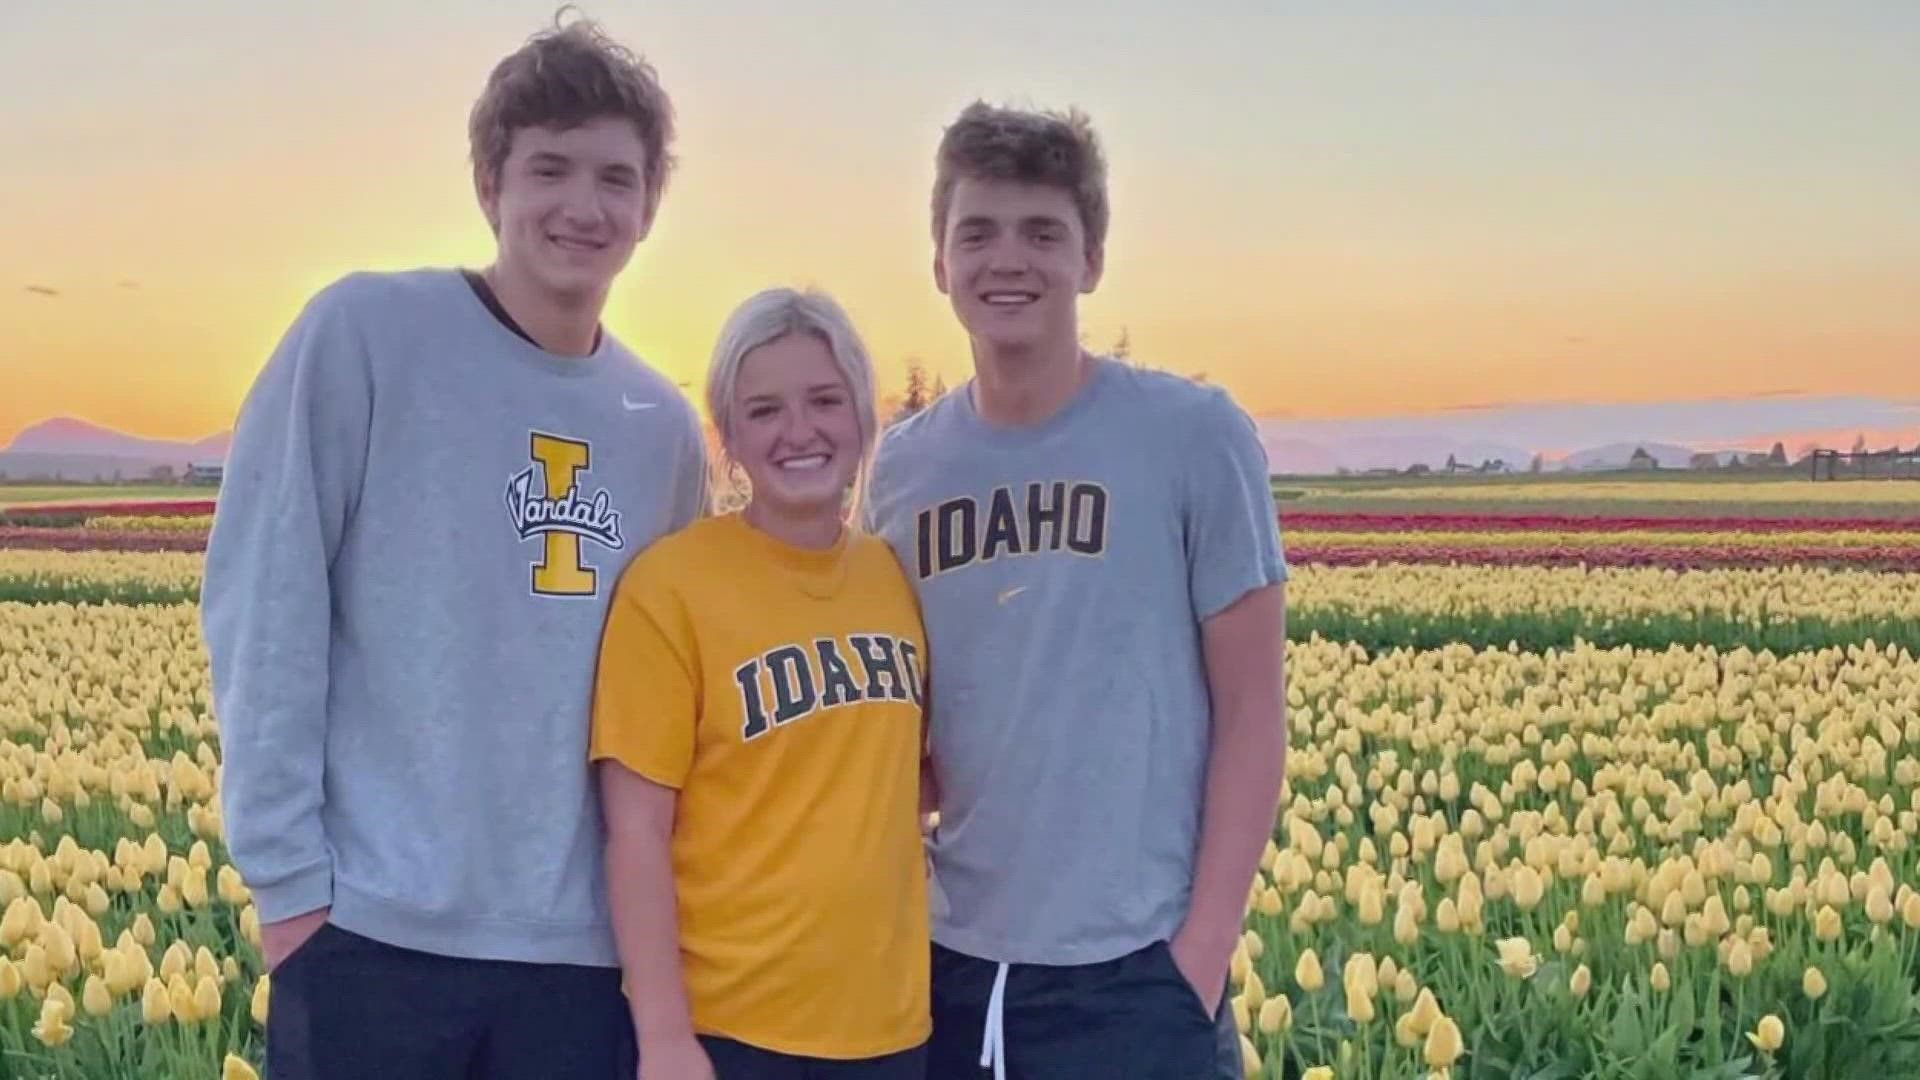 Ethan Chapin's friends are planting tulips in his hometown to remember the positive impact he had on everyone who knew him.